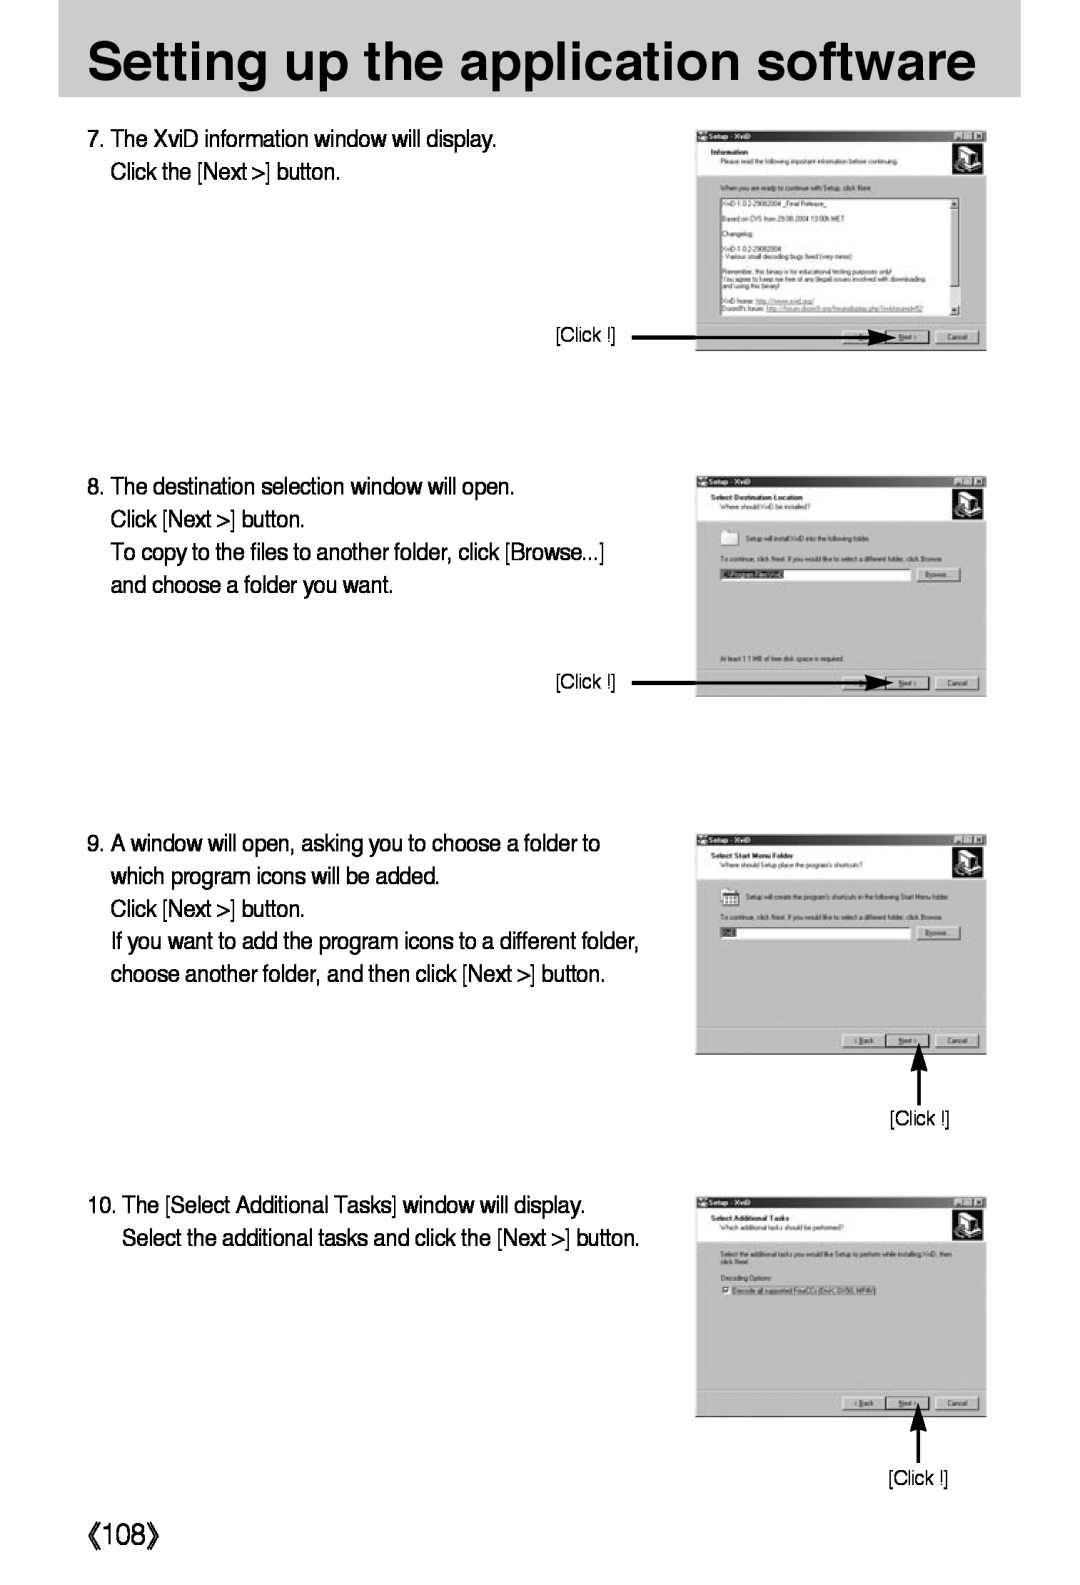 Samsung L50 user manual 《108》, Setting up the application software 